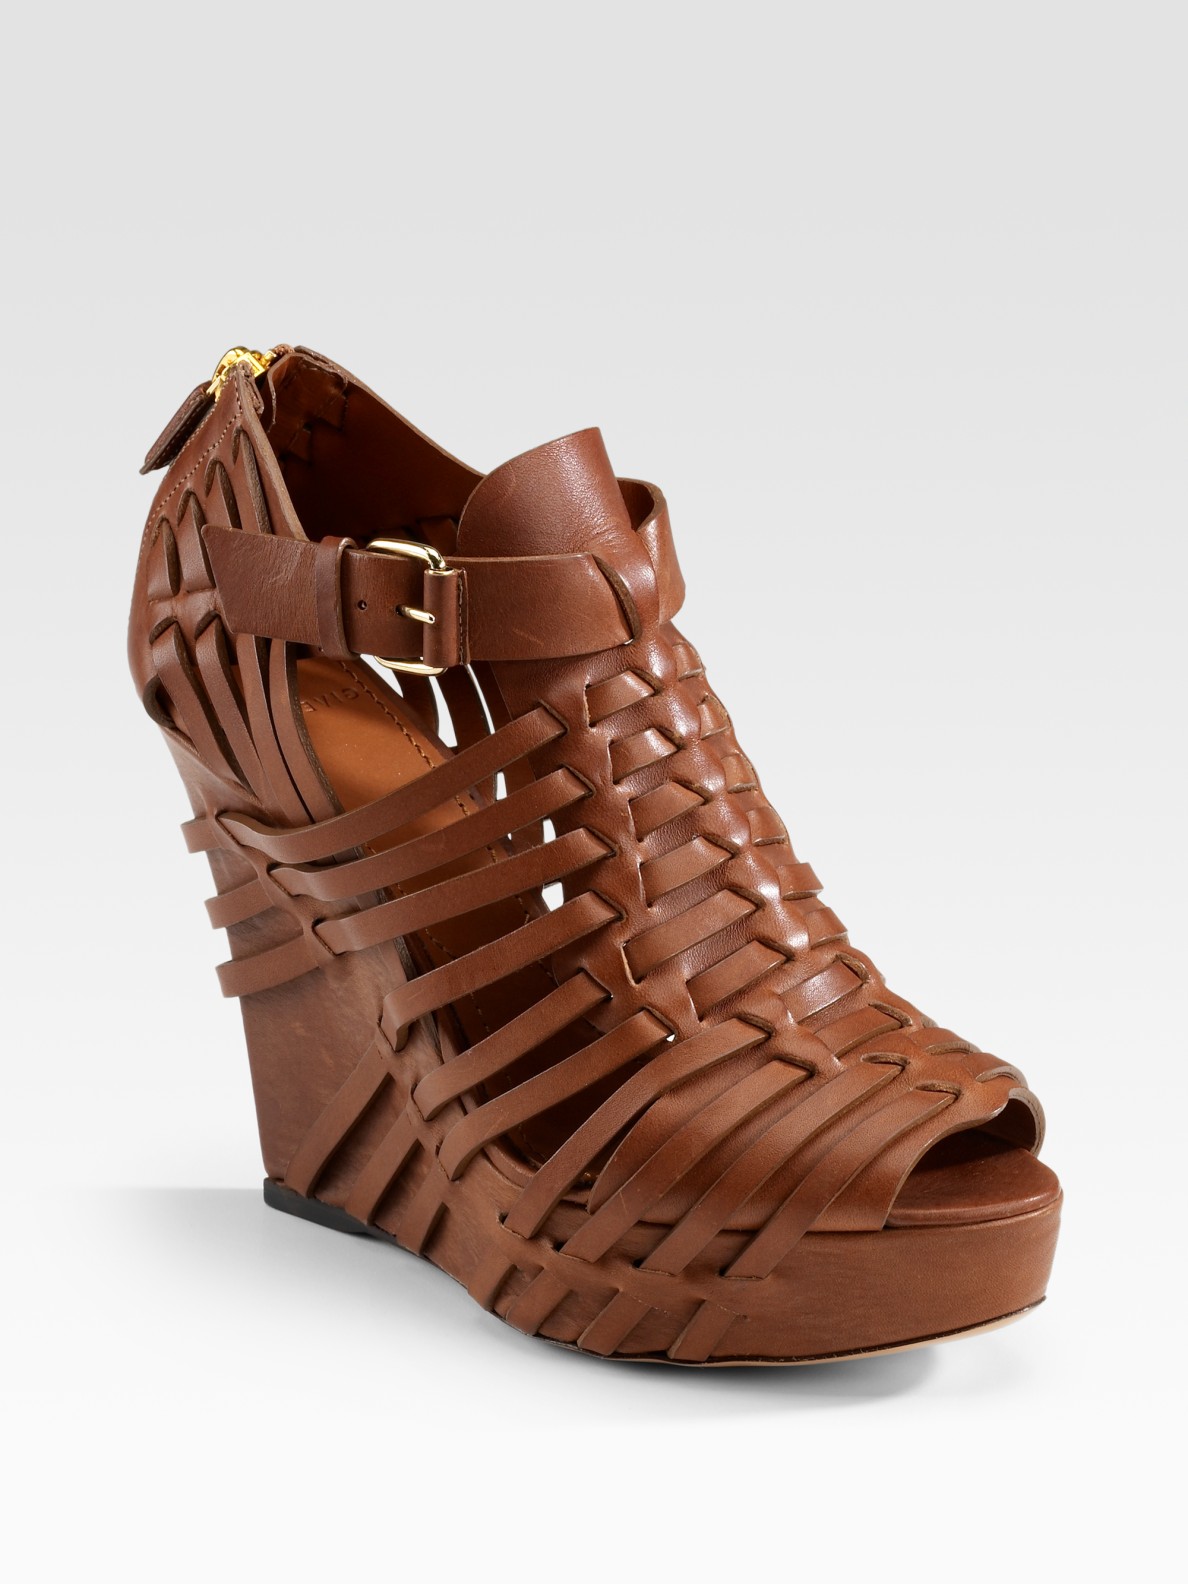 Givenchy Corinne Woven Leather Wedge Sandals in Brown (tan) | Lyst